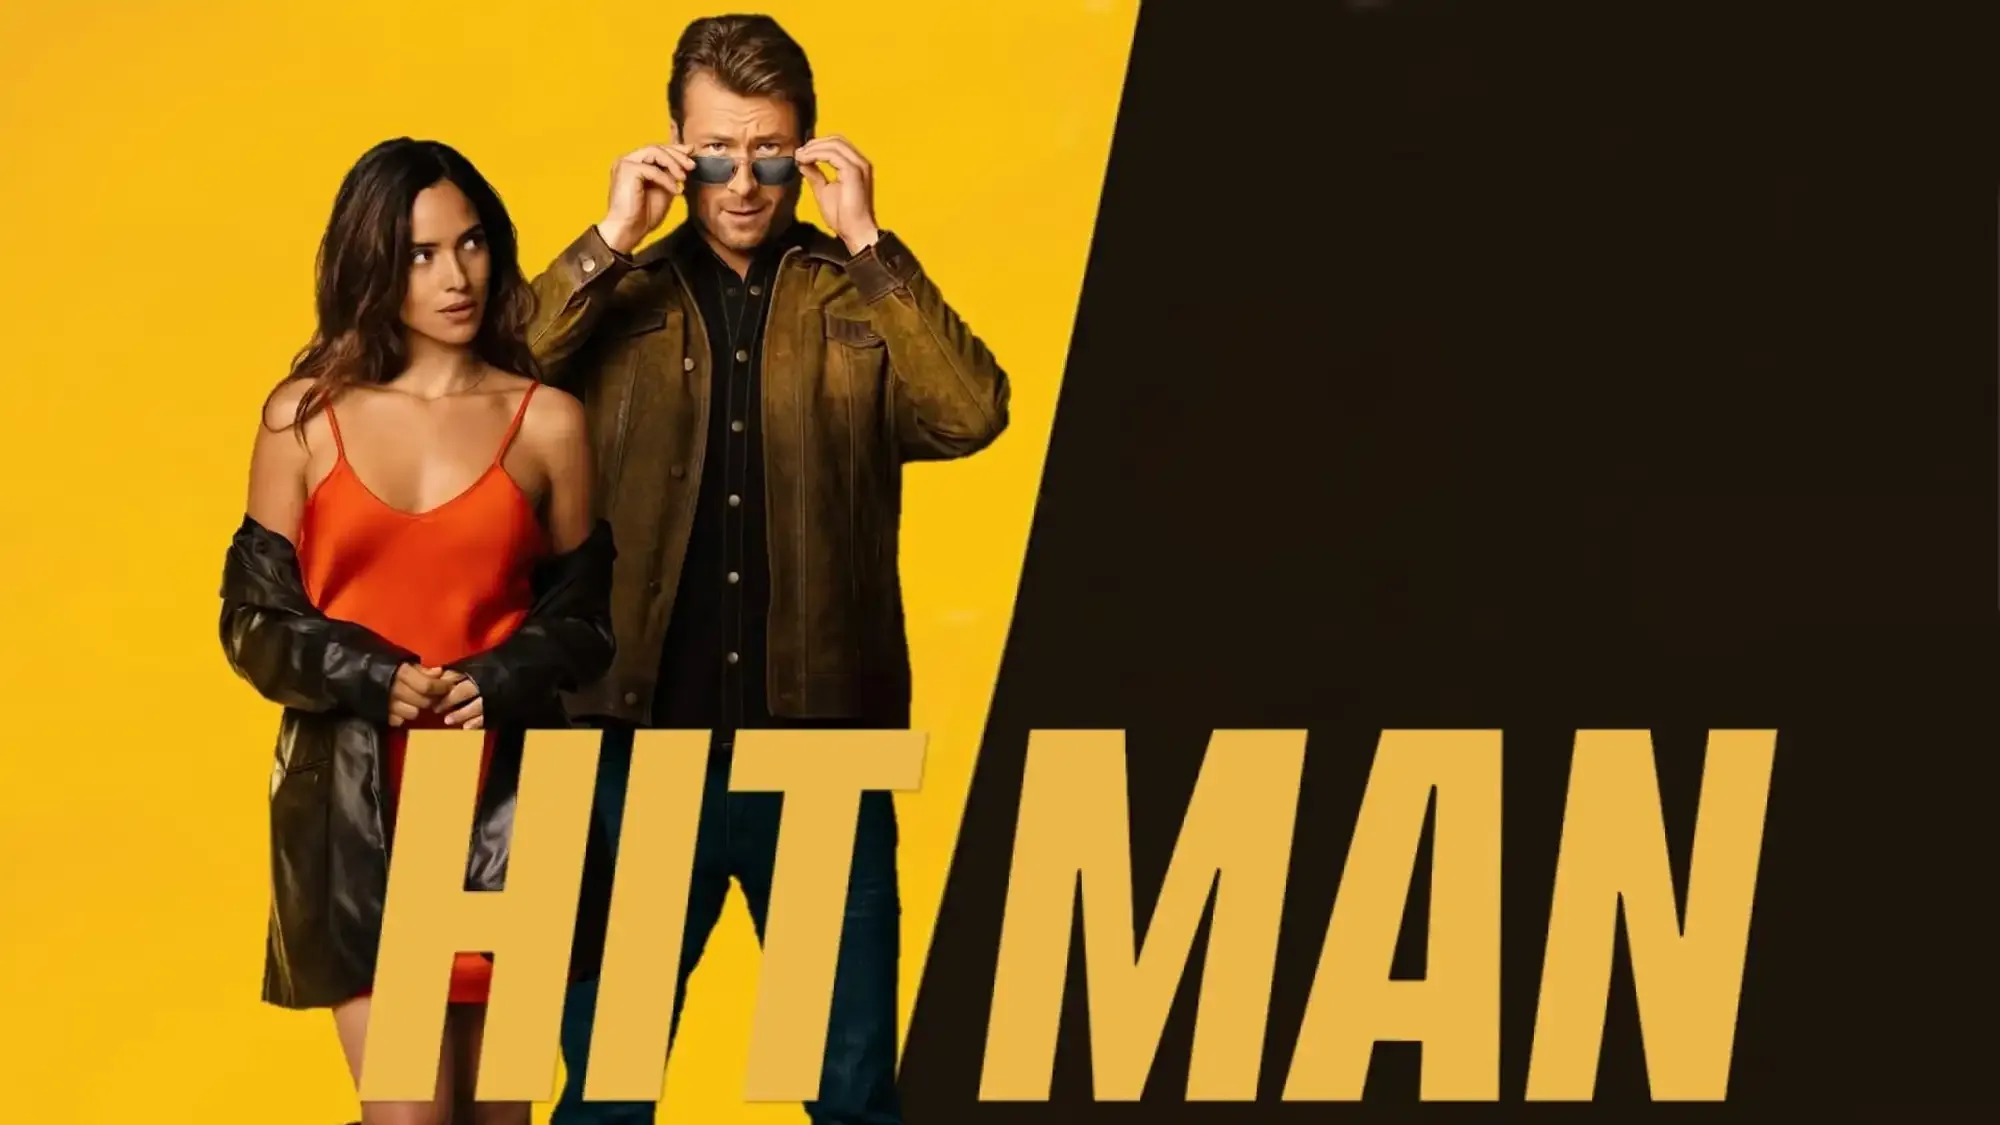 Hit Man movie review